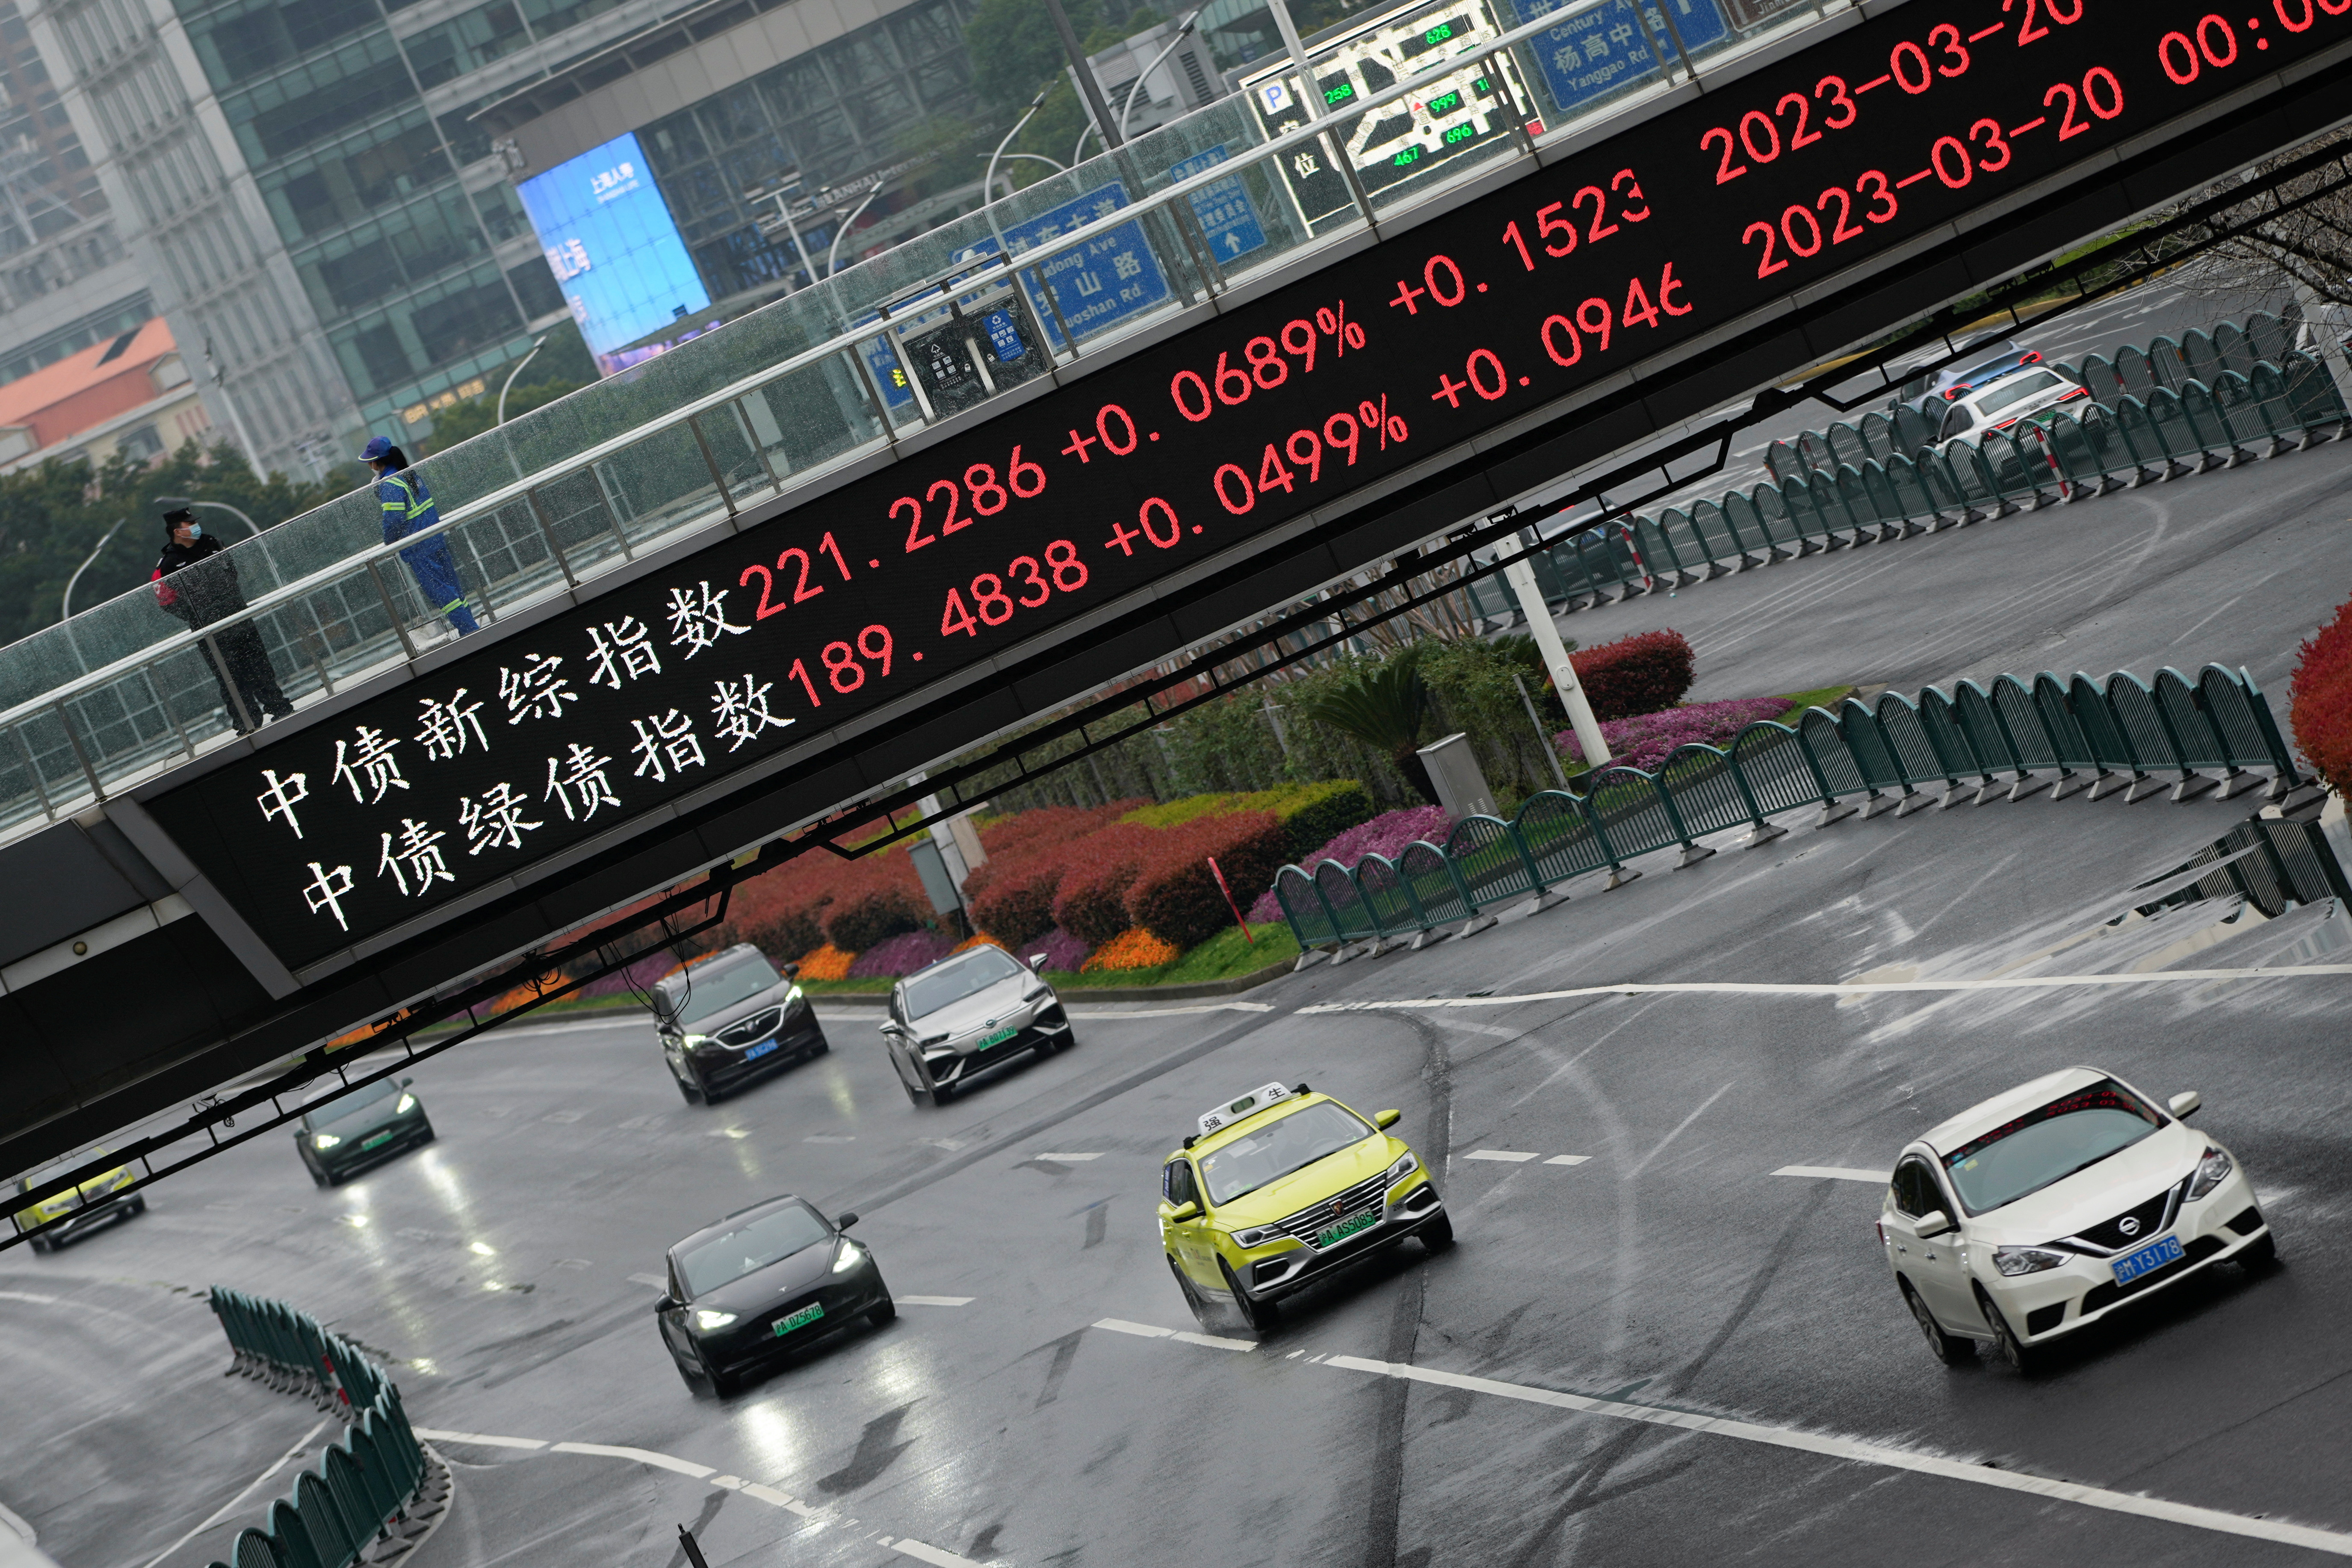 An electronic board shows stock indexes at the Lujiazui financial district in Shanghai